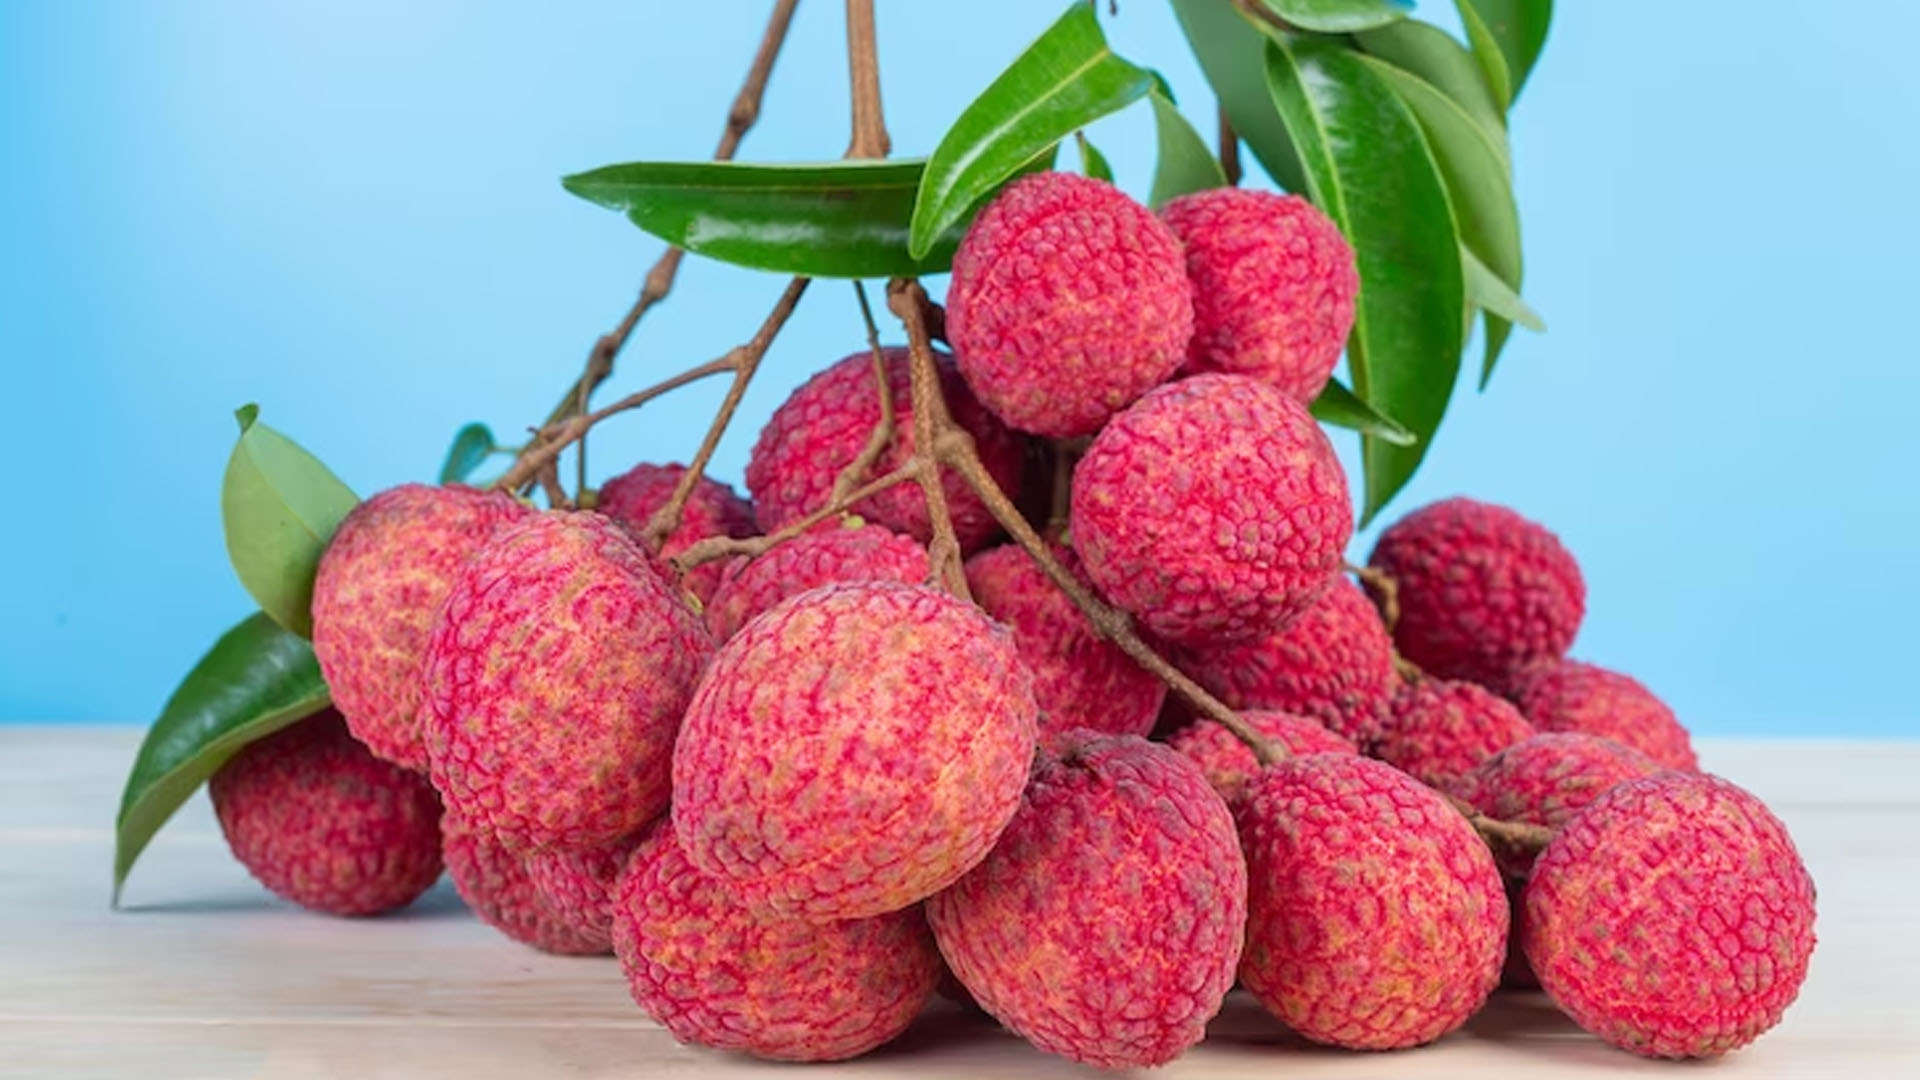 What Are The Health Benefits of Lychee Fruit?